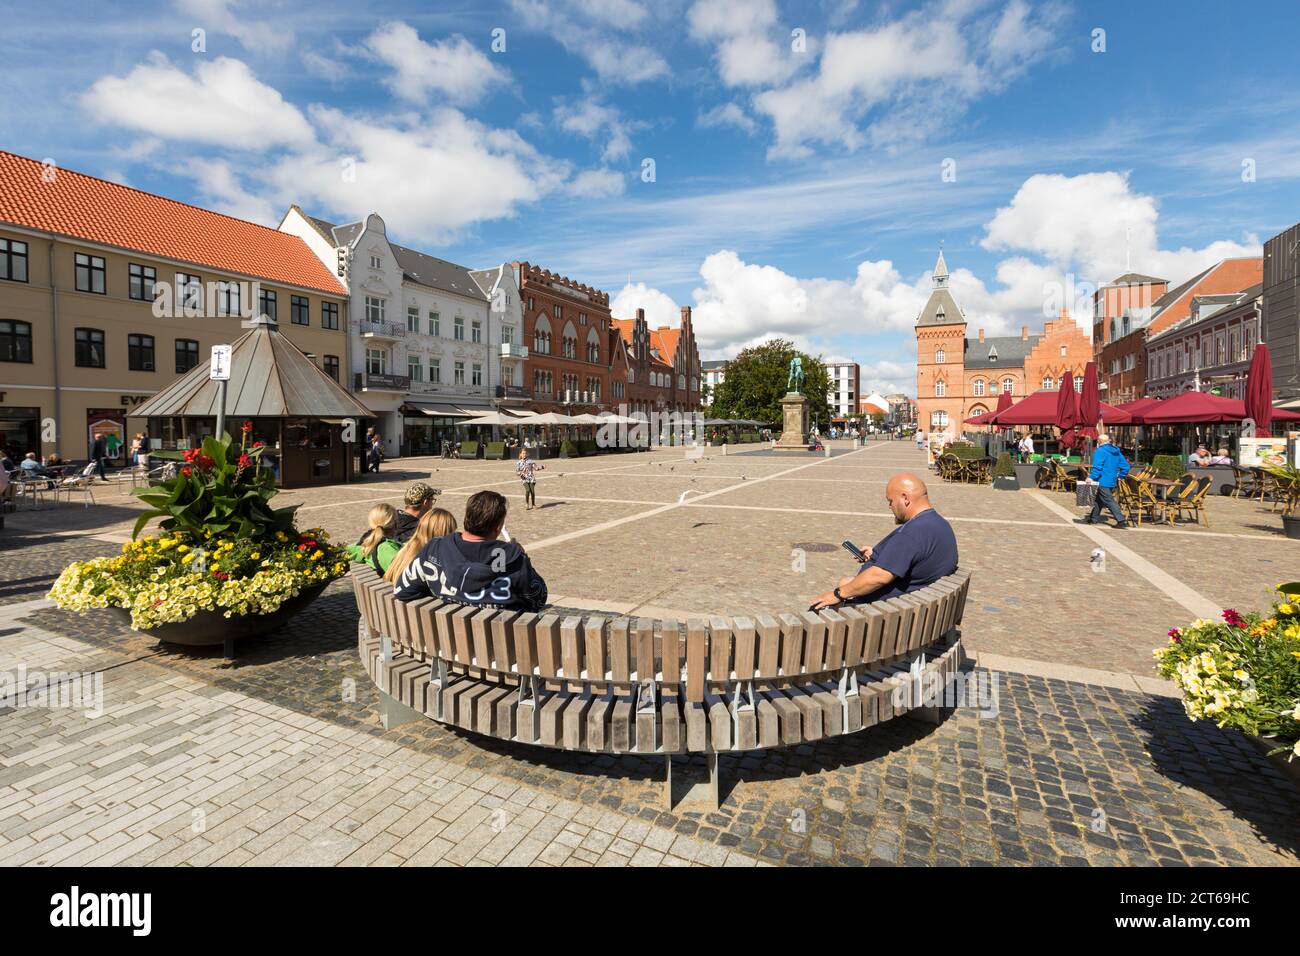 Esbjerg, Denmark - August 27, 2020: Torvet, the main town square with the statue of King Christian IX in the center. Stock Photo